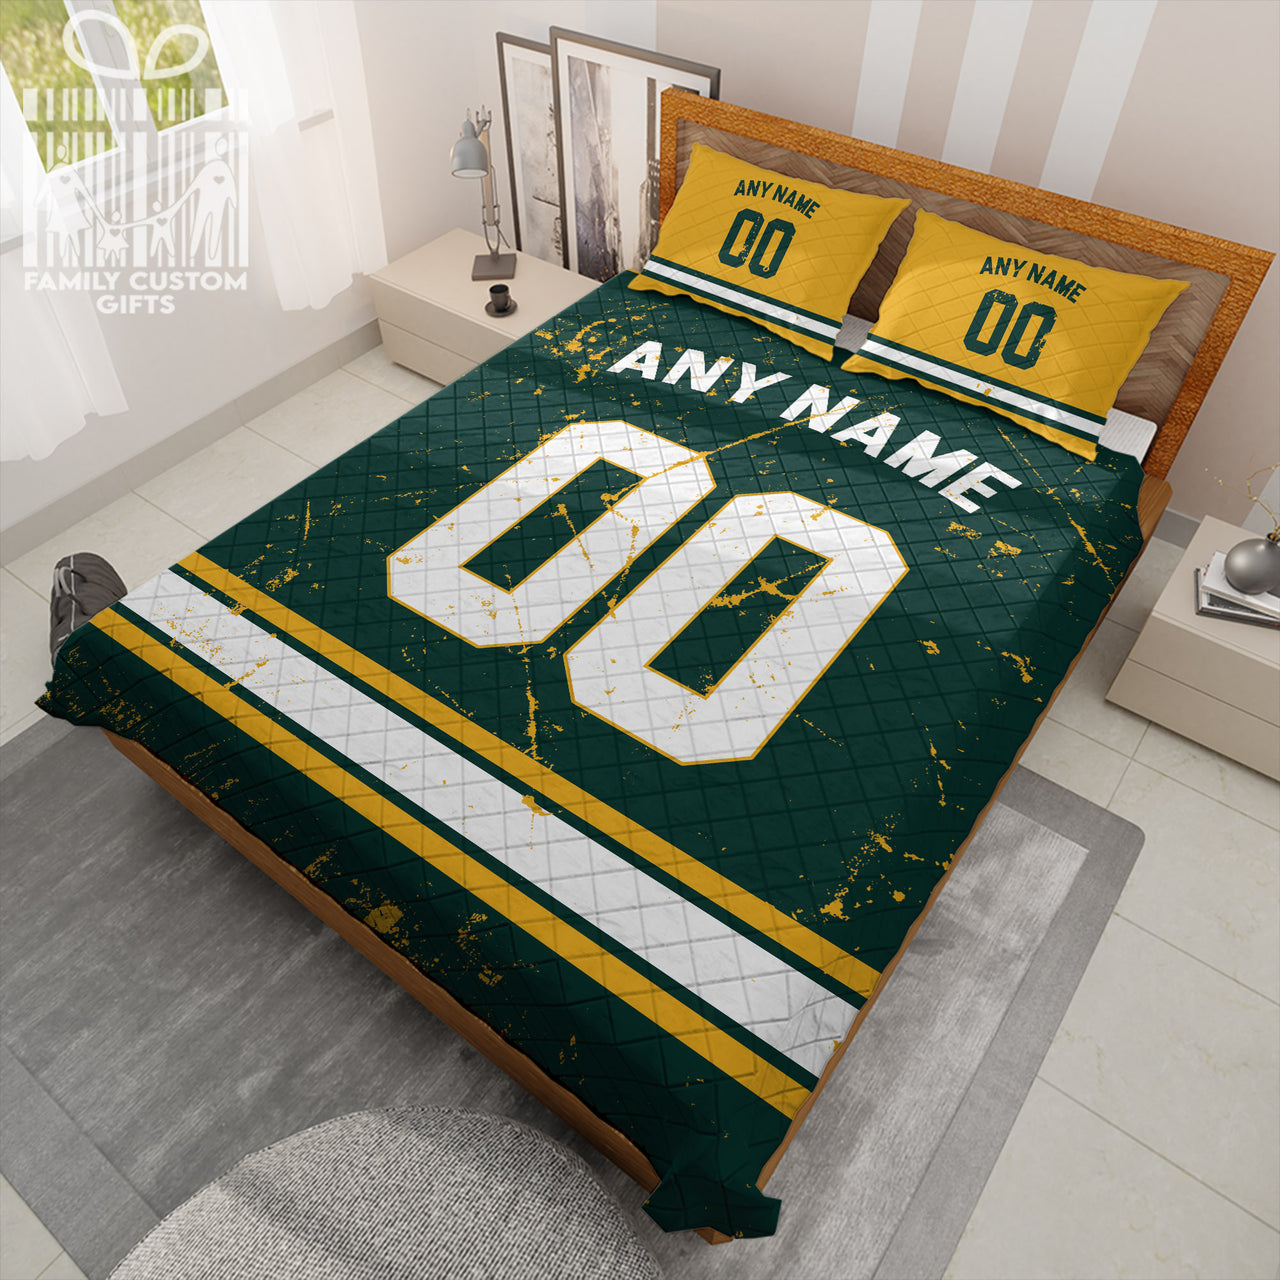 Custom Quilt Sets Green Bay Jersey Personalized Football Premium Quilt Bedding for Men Women